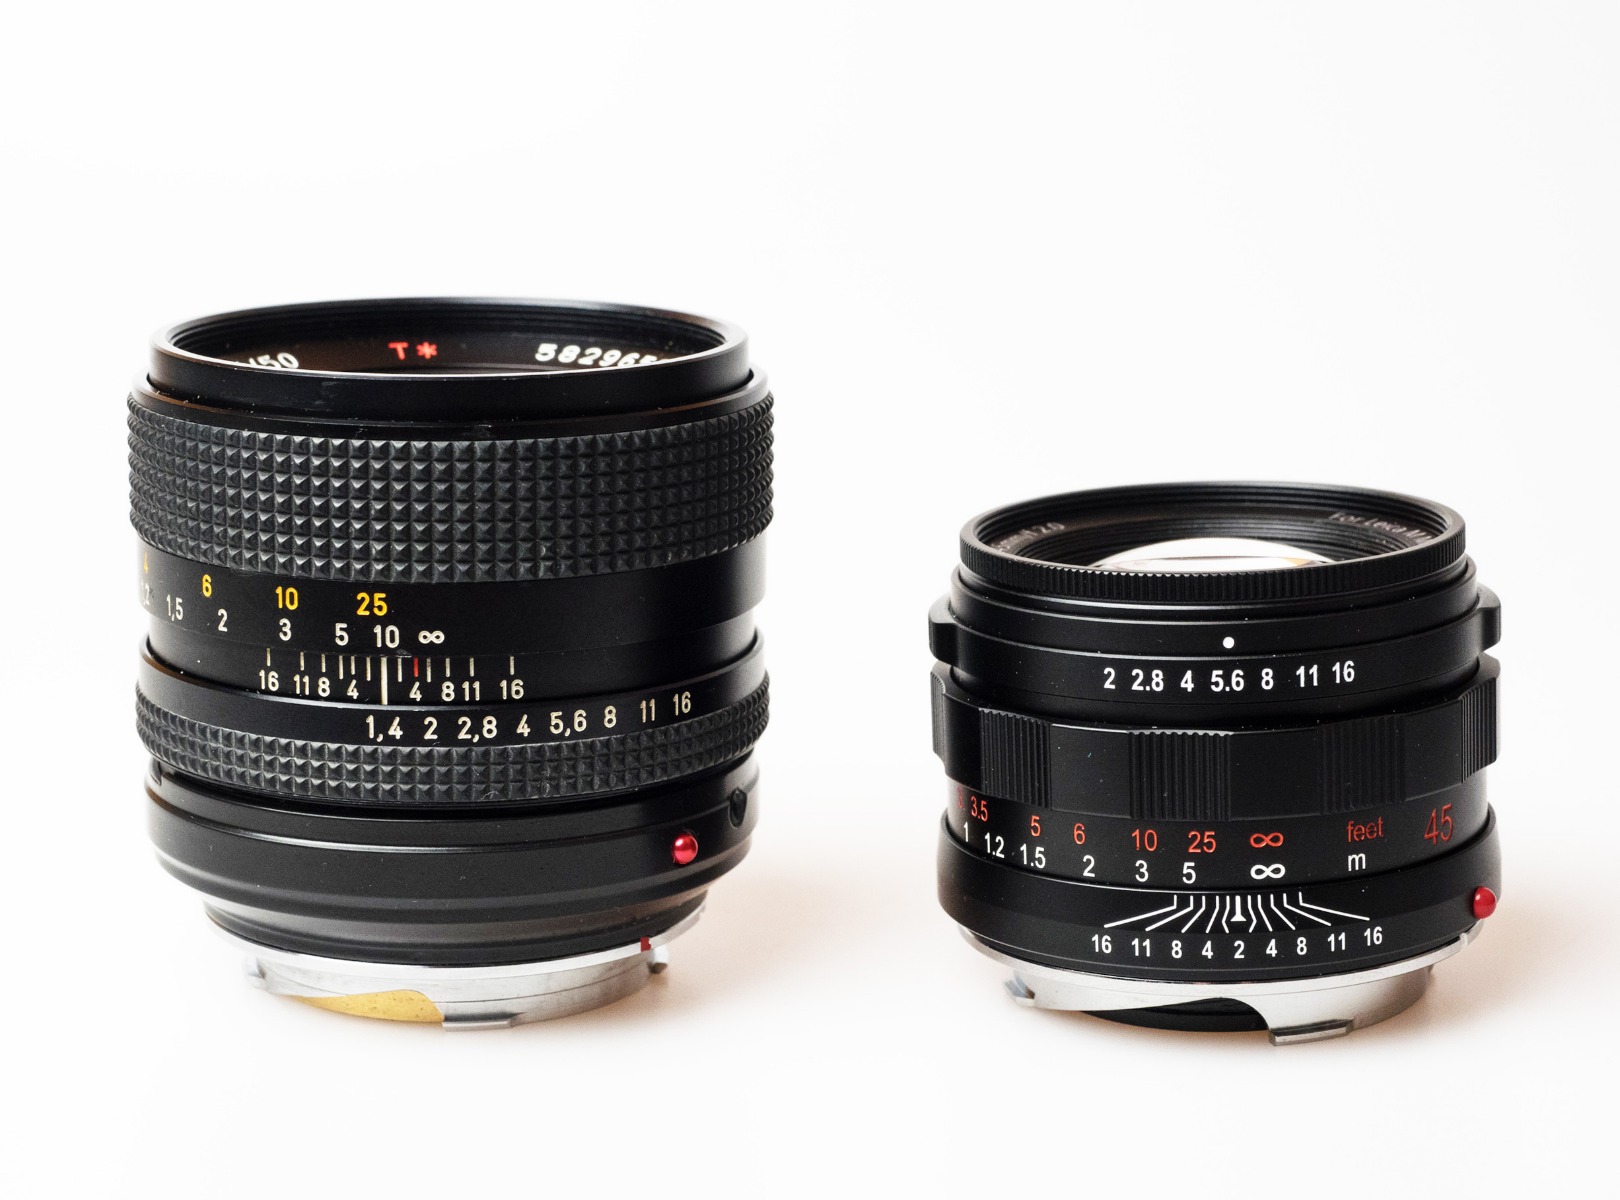 ZEISS Contax Planar 45 f/2.0 and 50 f/1.4 converted for Leica